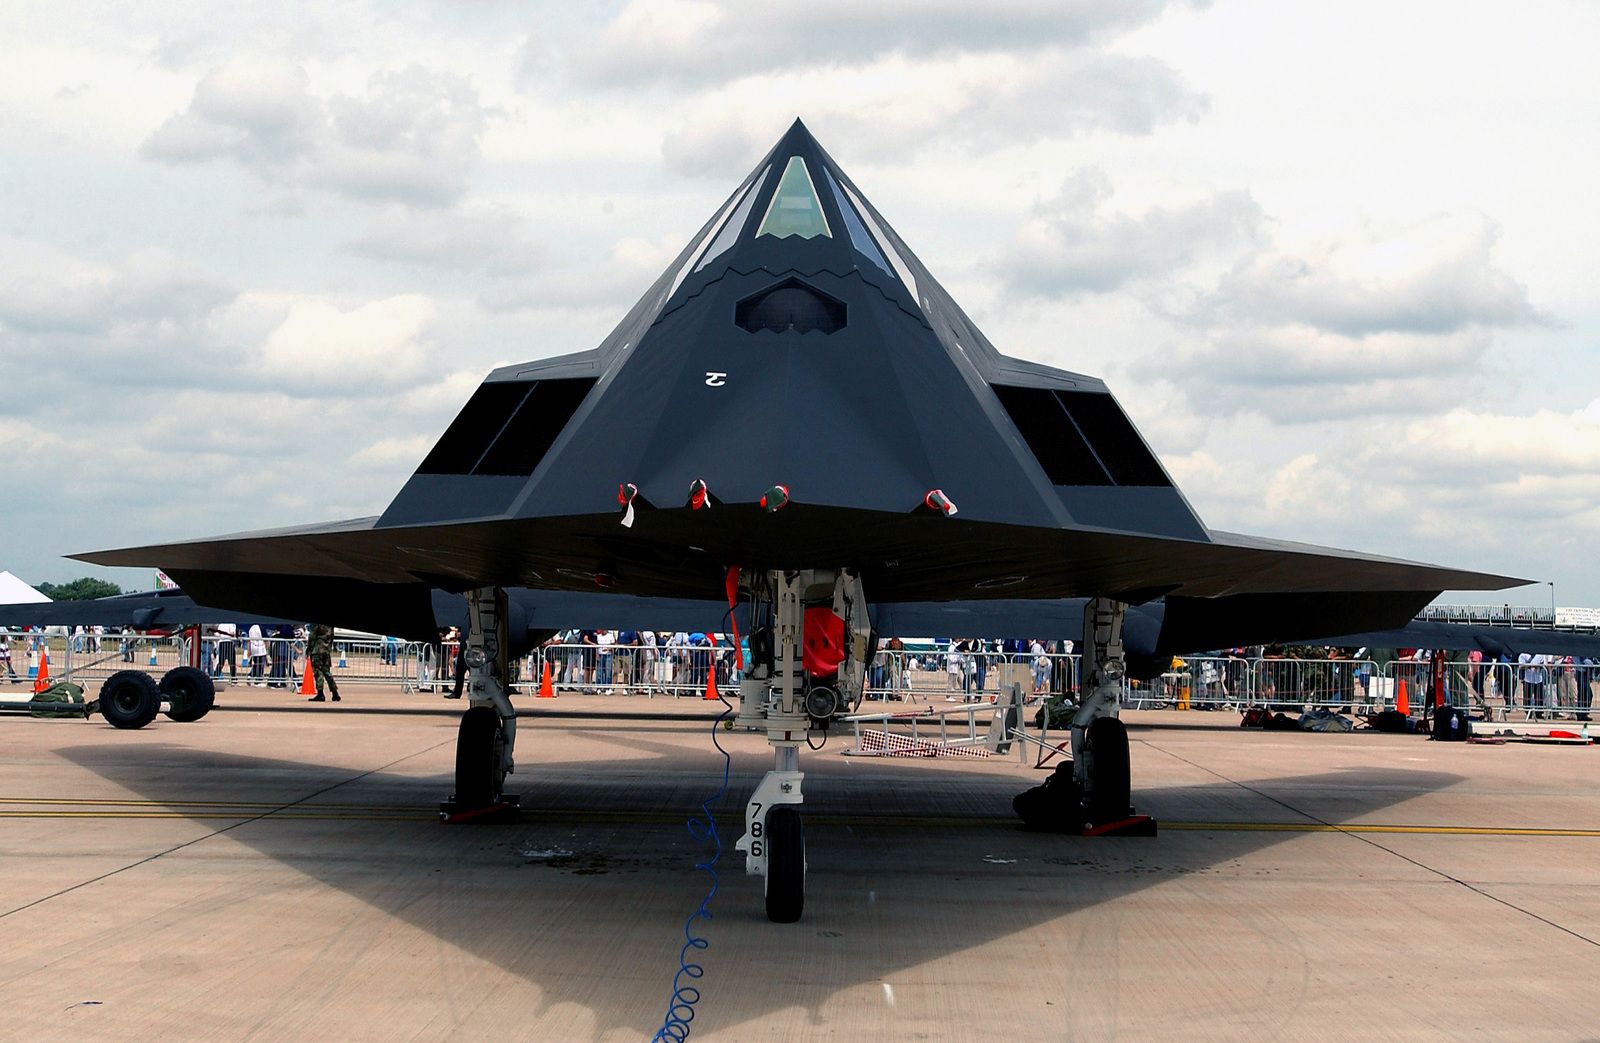 a-us-air-force-usaf-f-117a-nighthawk-stealth-fighter-sits-on-display-at-the-5c2285-1600